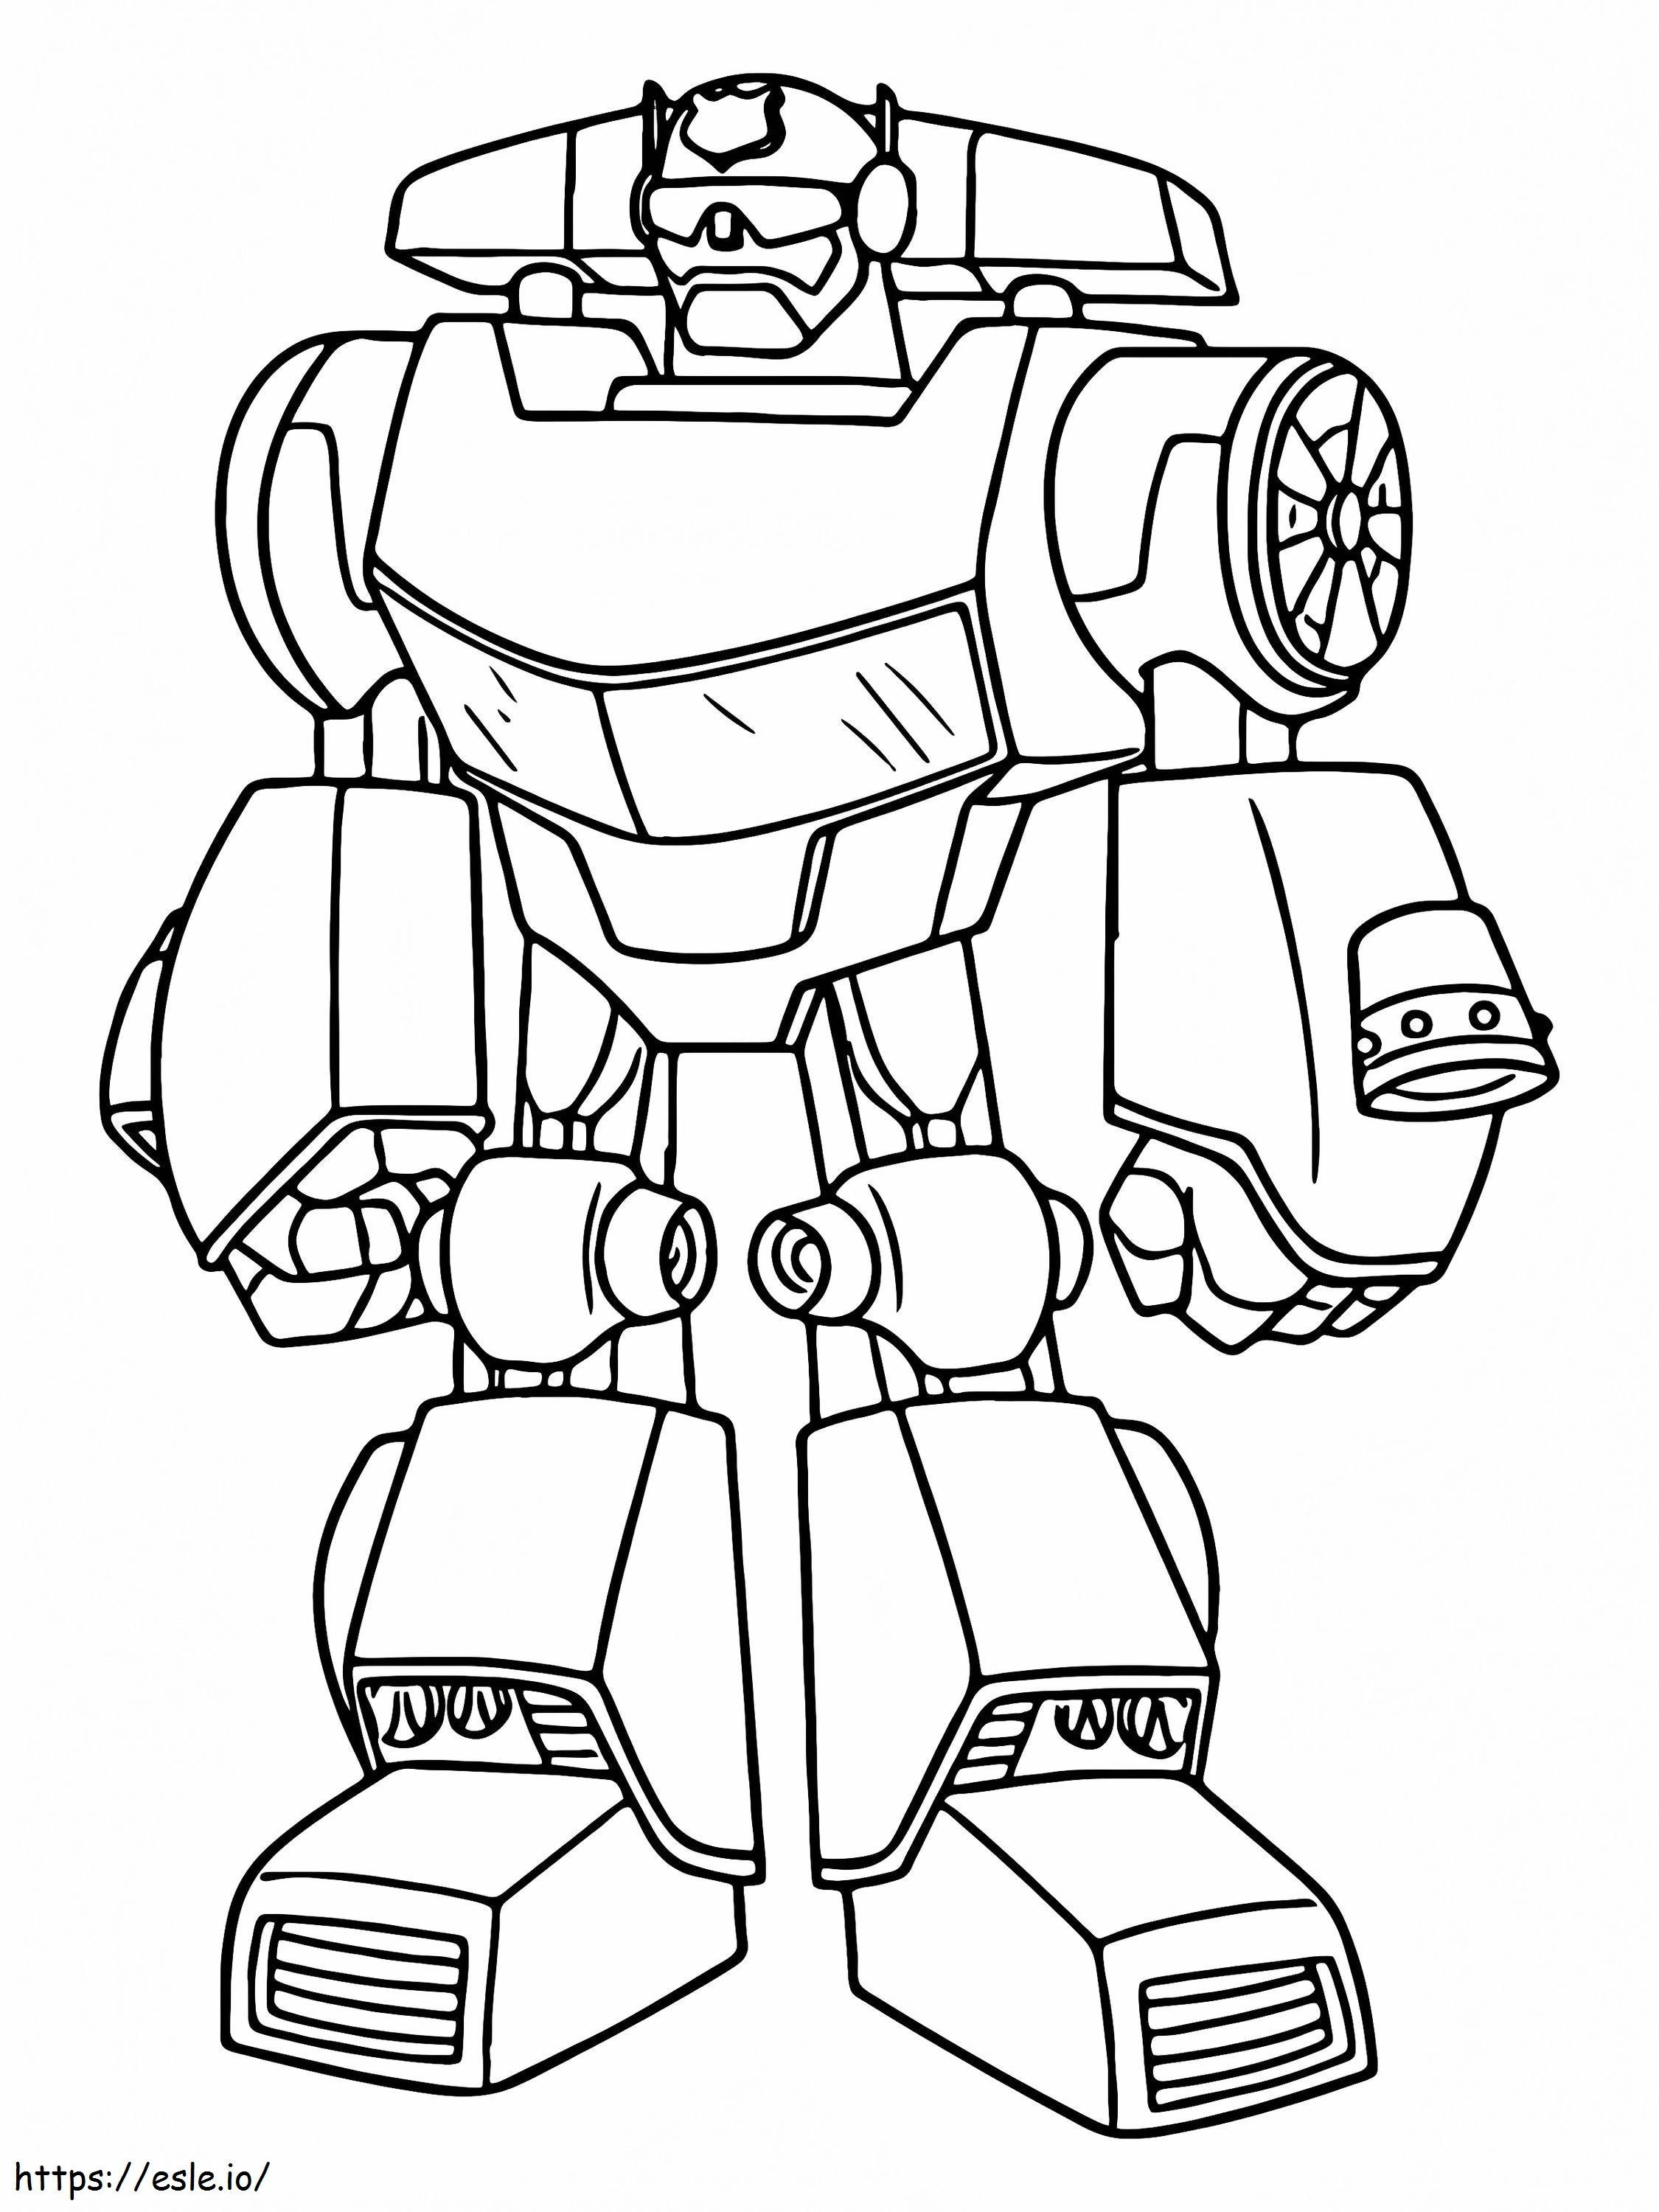 Commander Bumblebee coloring page